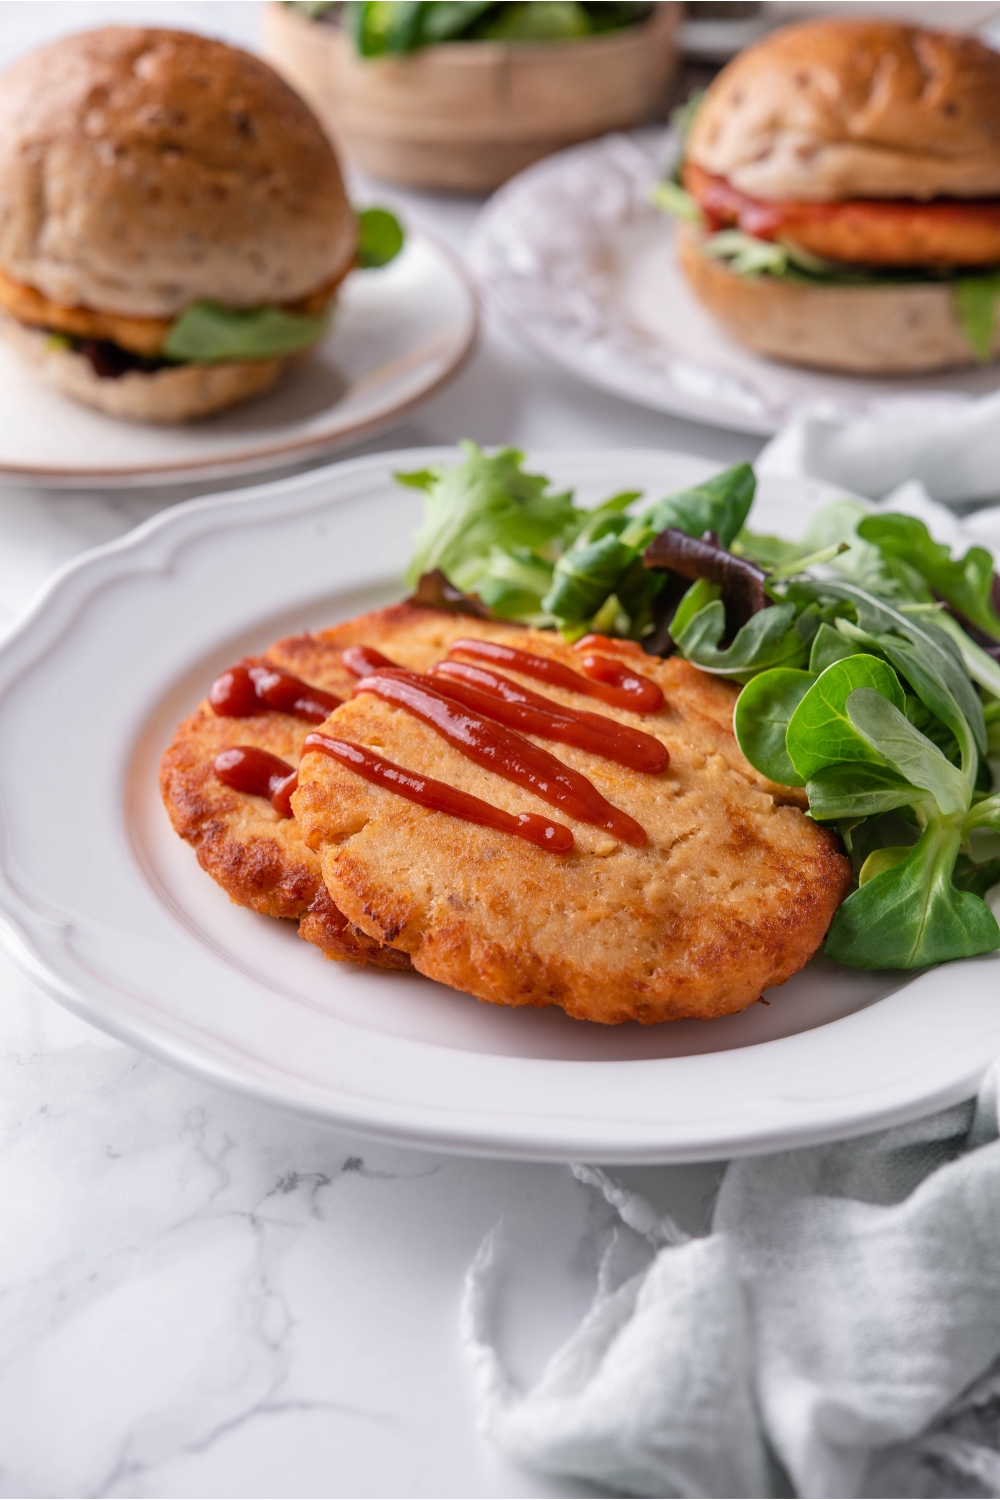 Two fried salmon patties covered with a drizzle of ketchup and layered on top of each other on a white plate with a side salad. In the background are two salmon burgers.